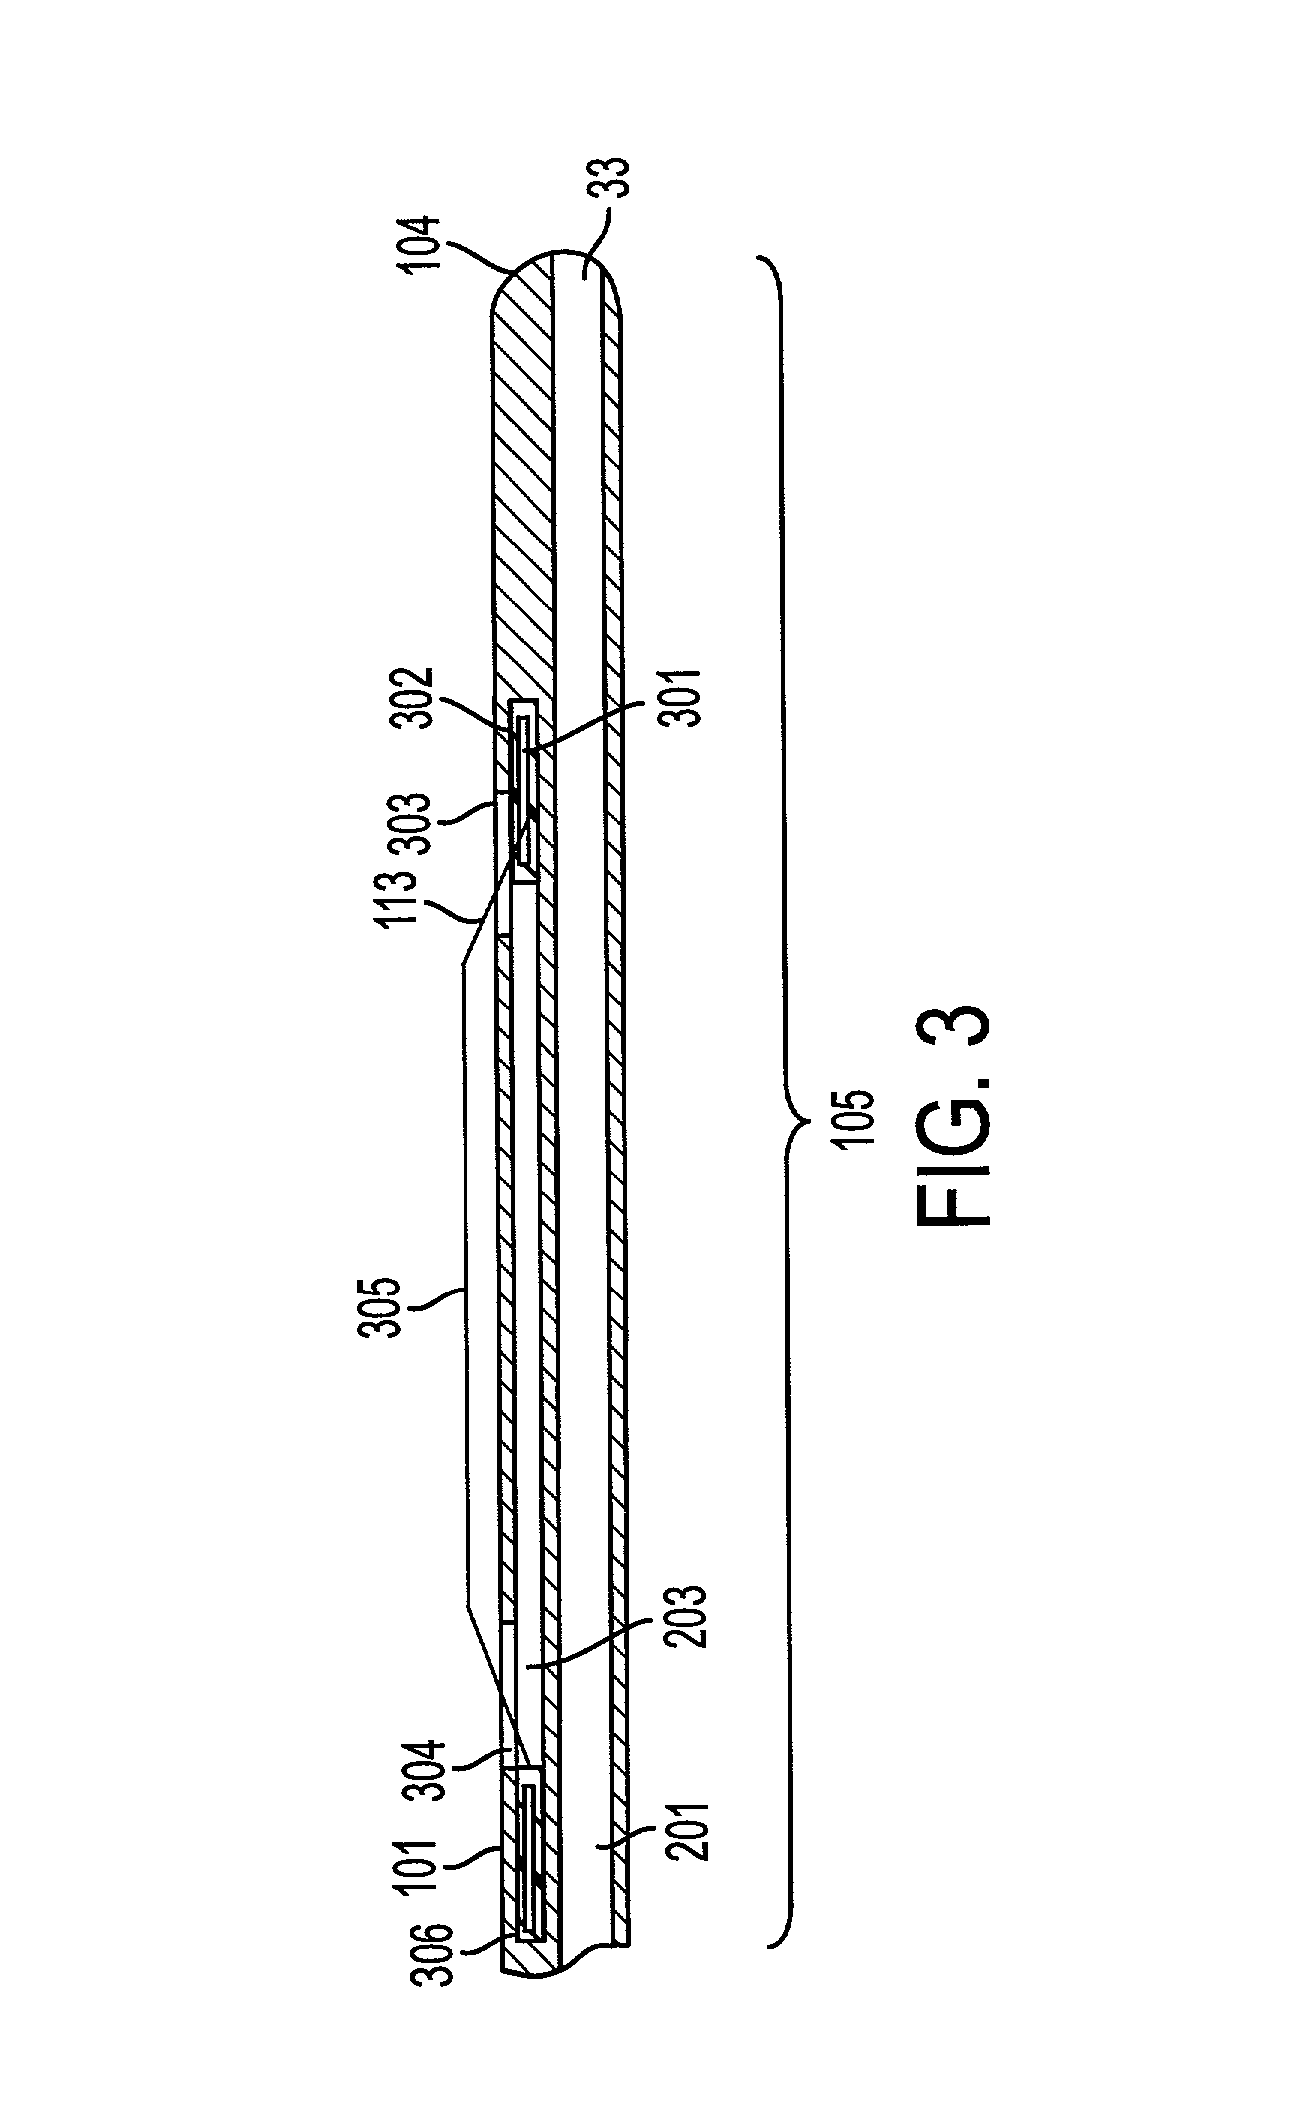 Method and apparatus for measuring and controlling blade depth of a tissue cutting apparatus in an endoscopic catheter